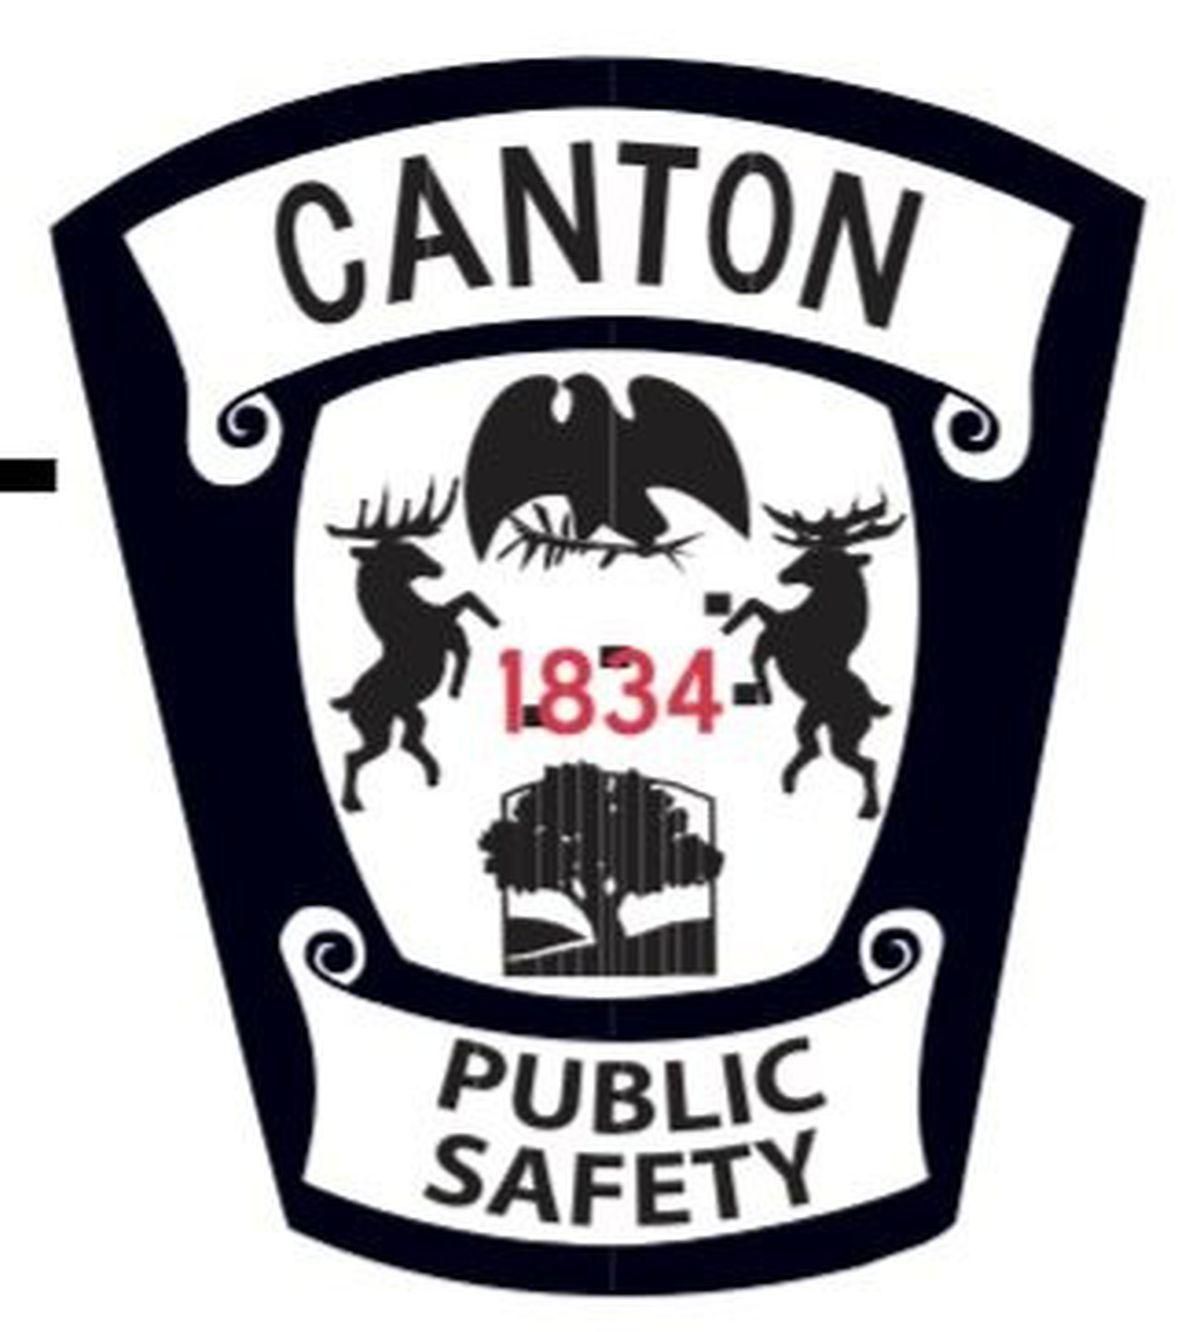 Canton Logo - Possible human remains found in Canton Township sewer